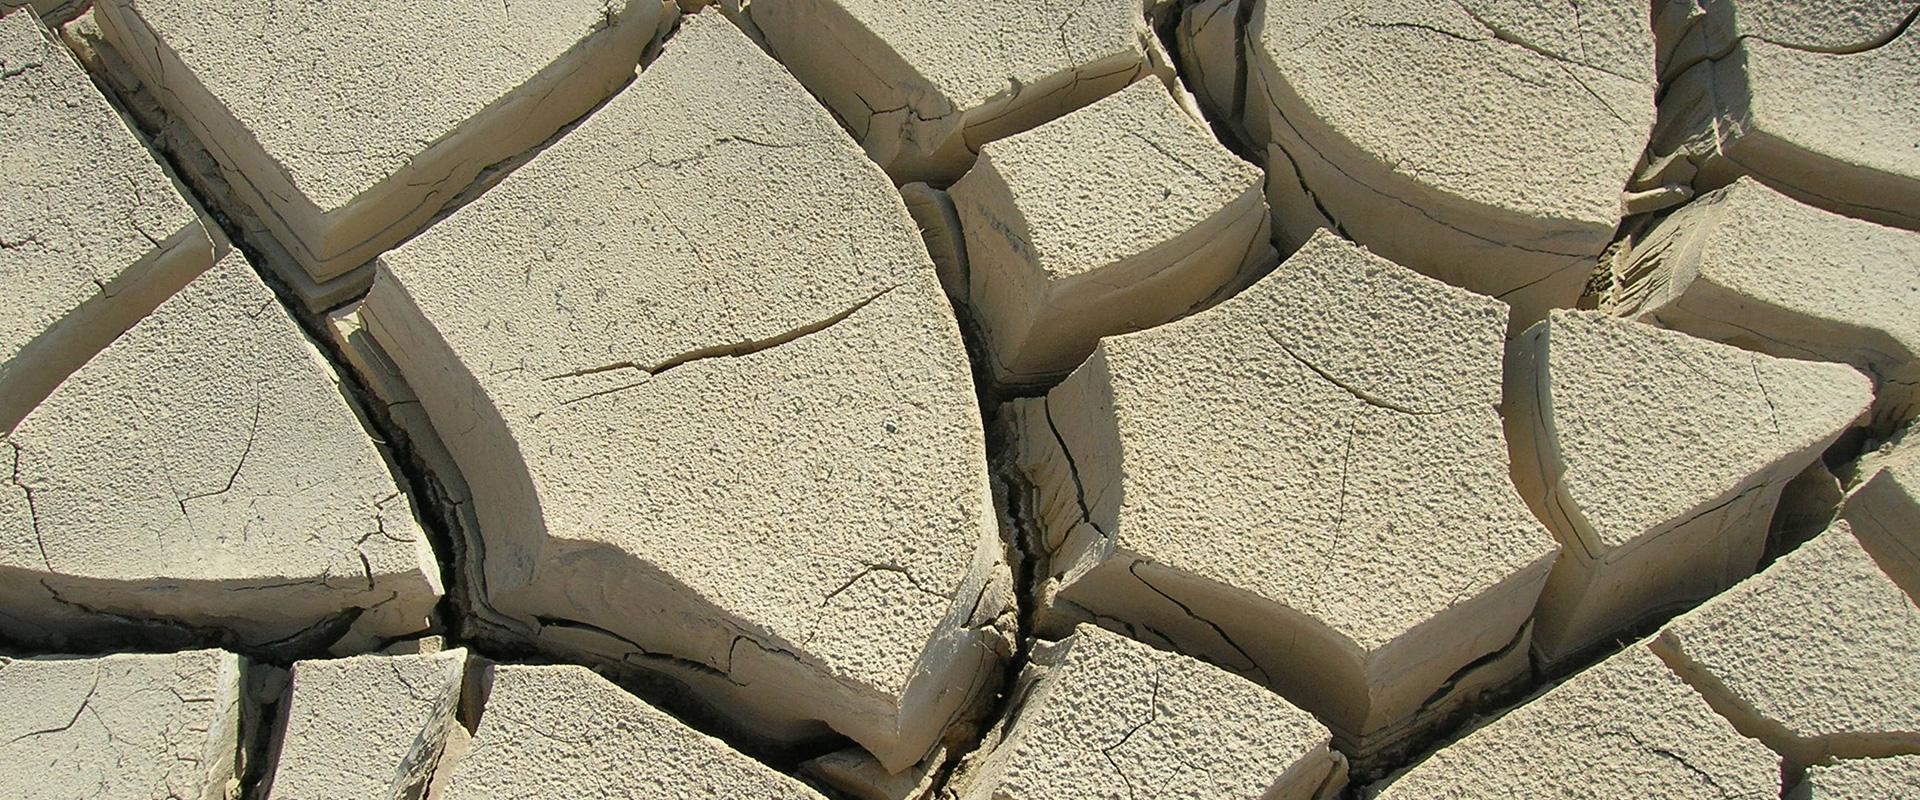 Parched loam in the bed of the Kuitun river, China